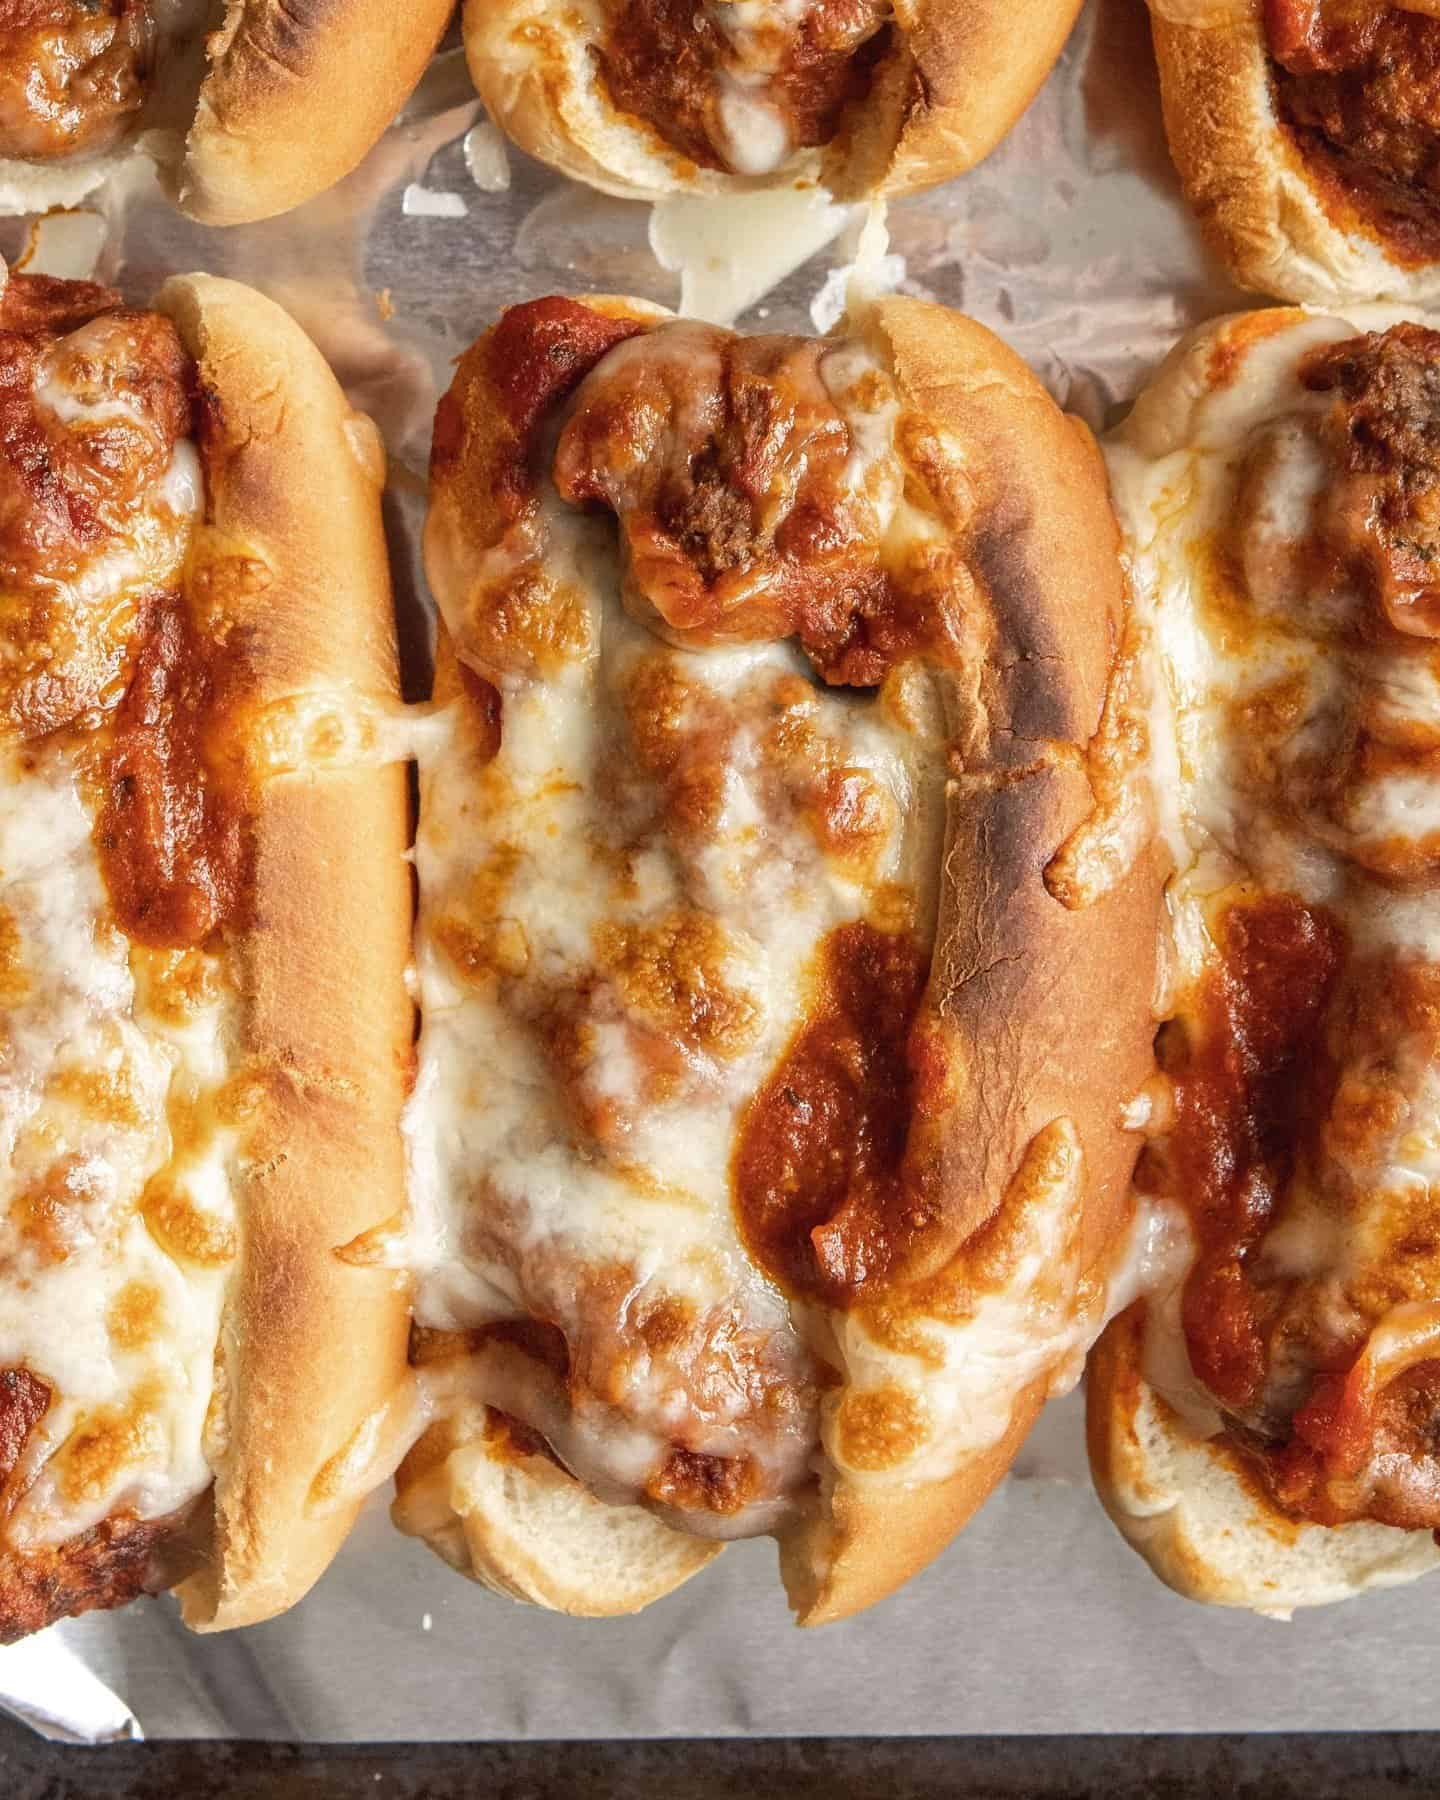 These Easy Weeknight Meatball Subs are the ultimate comfort food scaled down to a balanced proportion sized. ⁣
⁣
We nestled tender homemade meatballs into a roll, then cover them in marinara sauce and mozzarella cheese. Then we toast them in the oven till the bun got crispy and the cheese melted.⁣
⁣
Recipe in the bio!⁣⁣🤗⁣
⁣
#sandwich #meatball #meatballsub #easyrecipes #food52 #feedfeed #todayfood #quickdinner #dinnerideas #dinnerrecipes #meganvskitchen #thekitchn #buzzfeedfood #bhgfood #todayfood